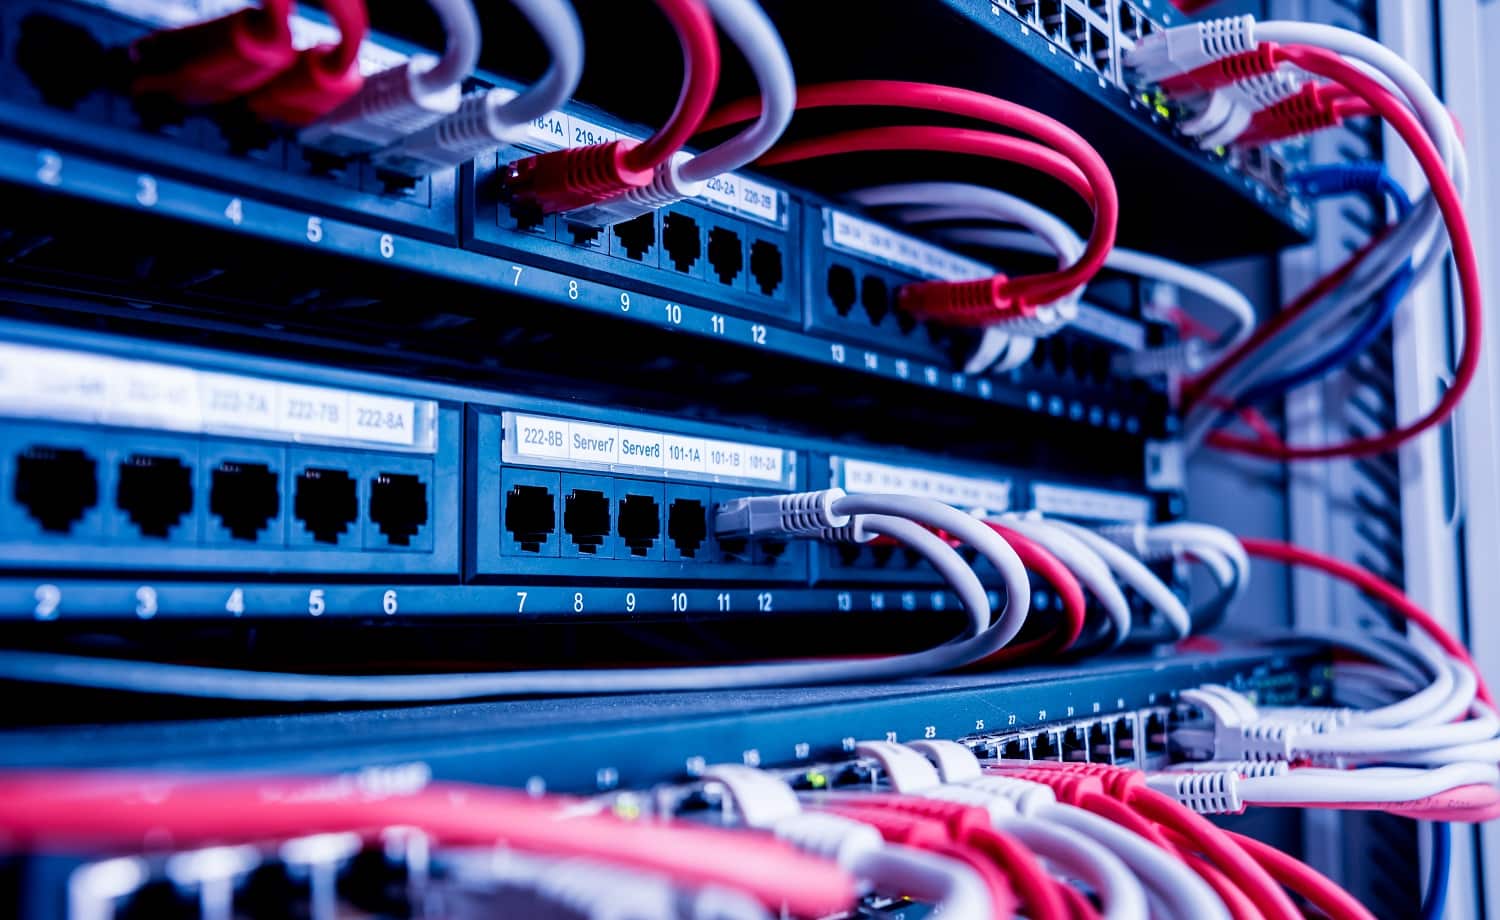 Network switch and ethernet cables in red and white colors. Data Center. Background